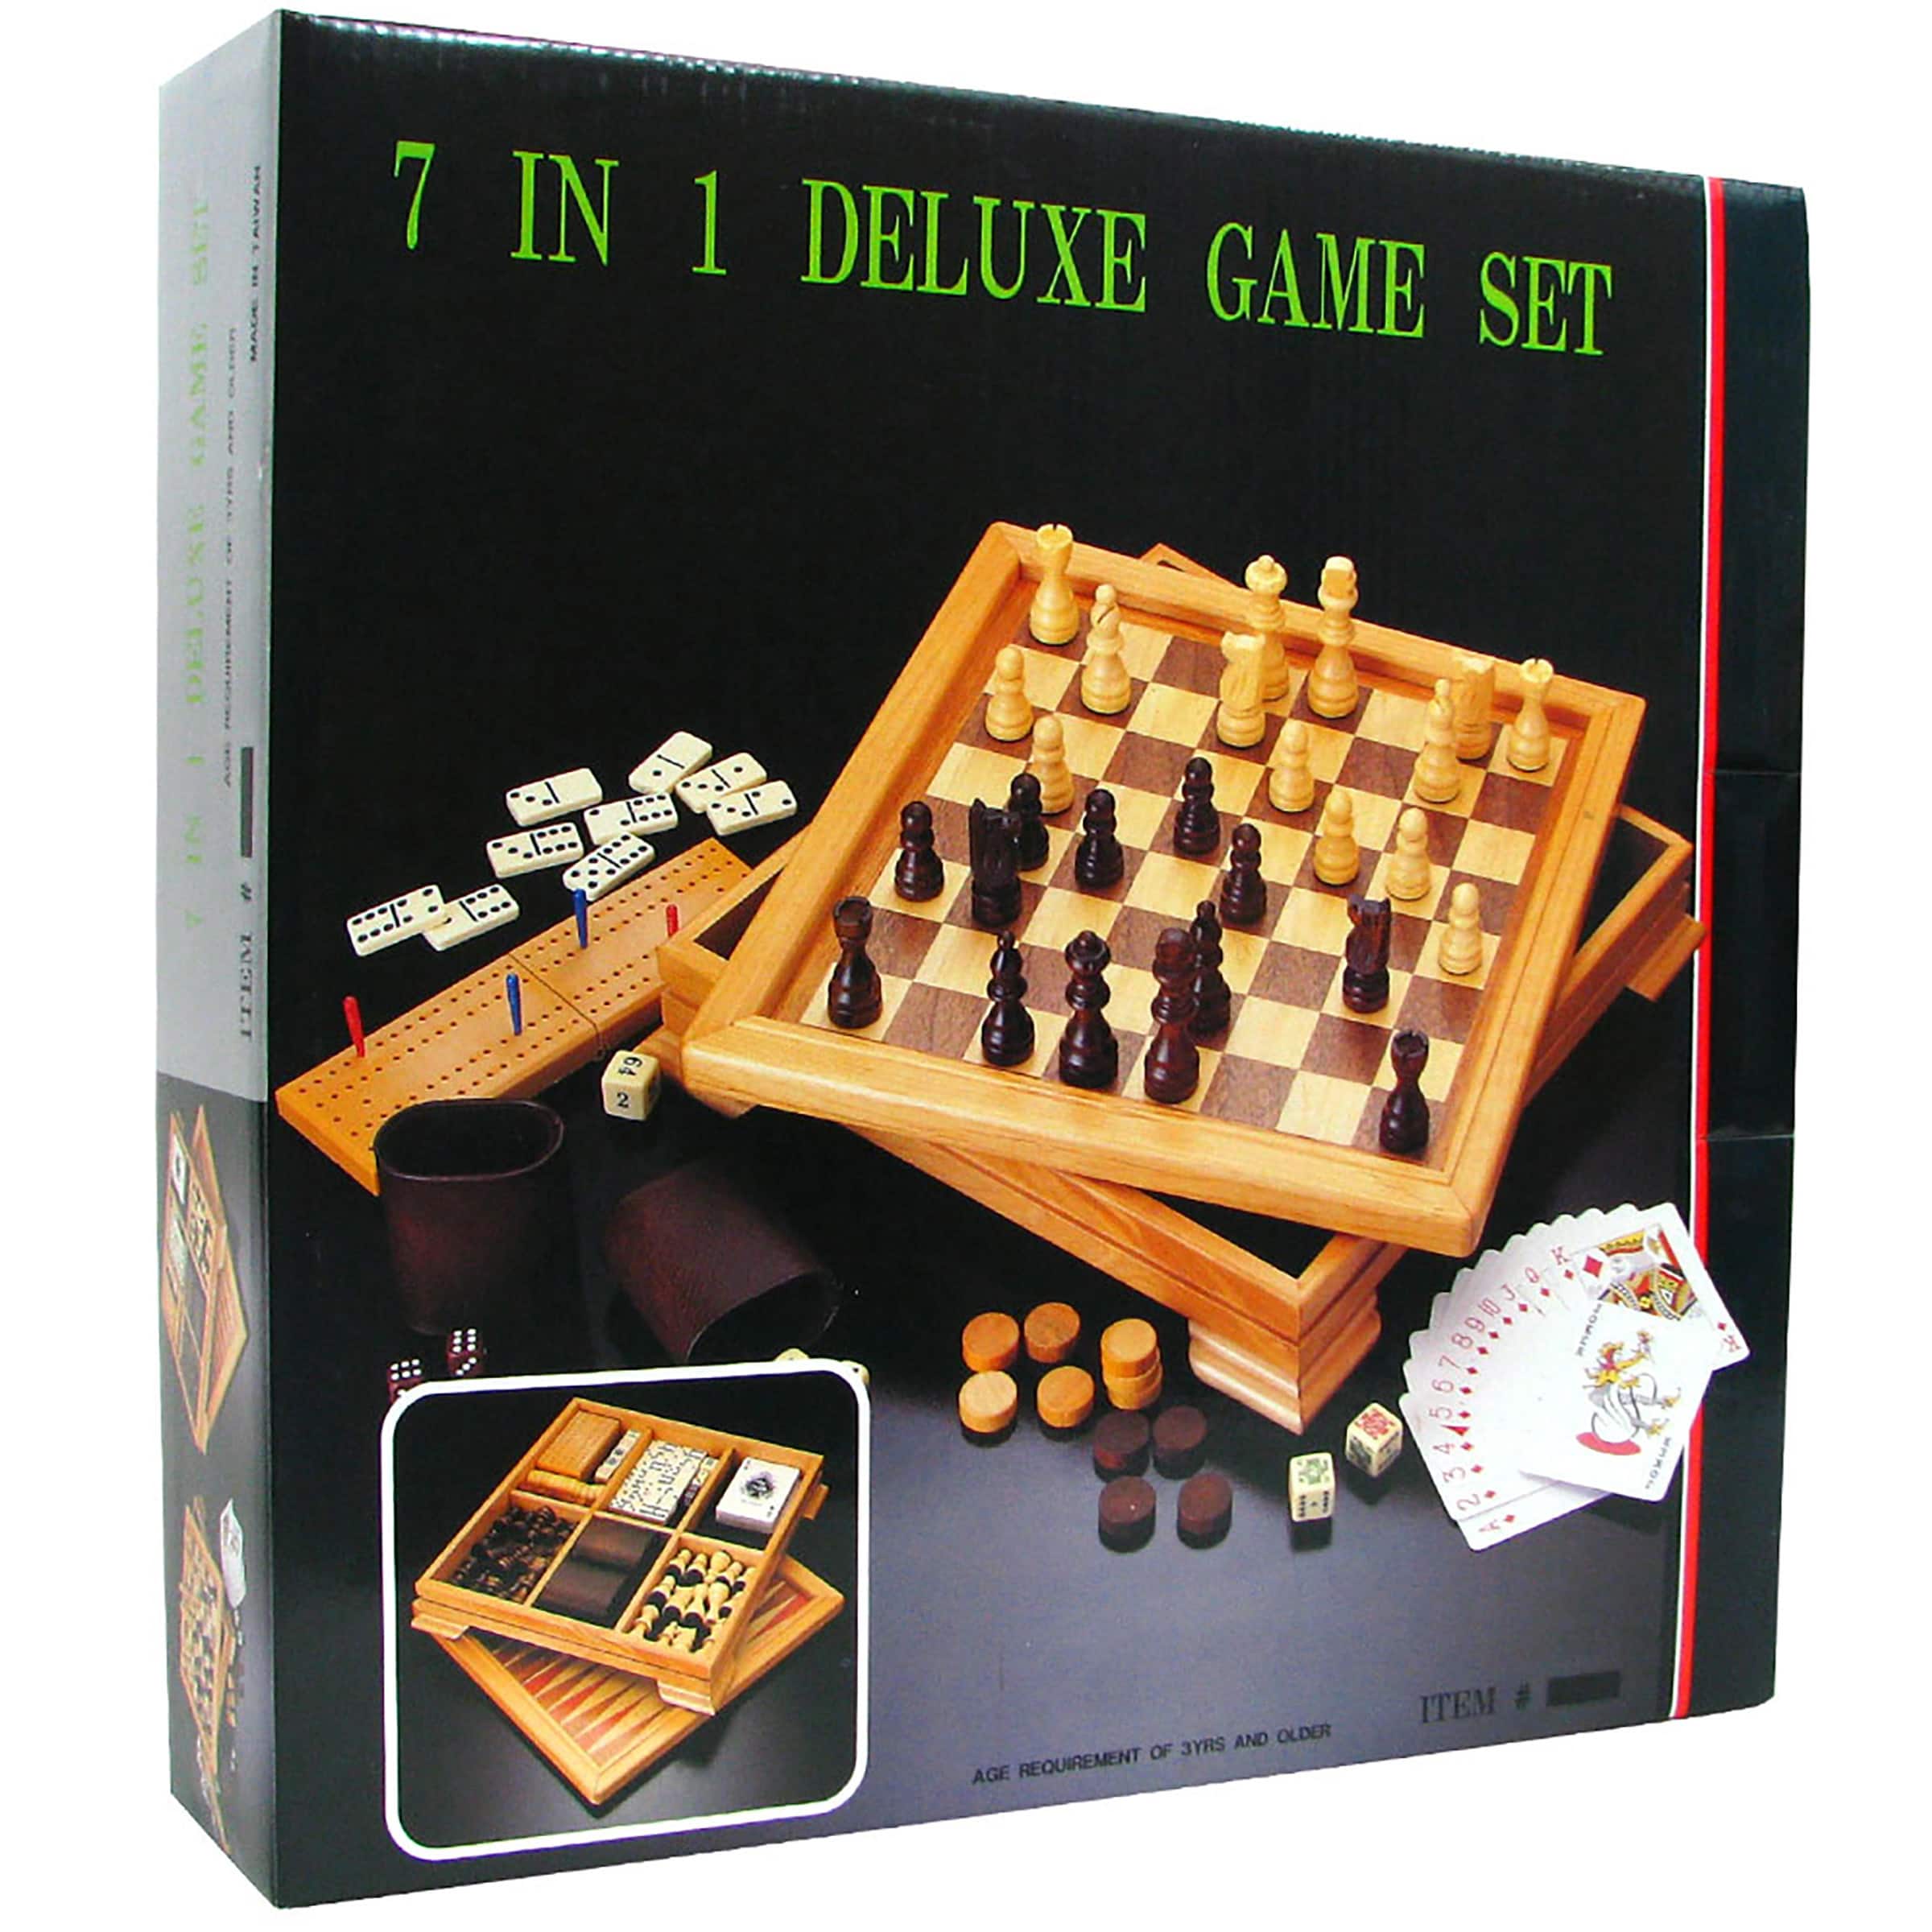 Toy Time 7-in-1 Deluxe Wood Board Game Set